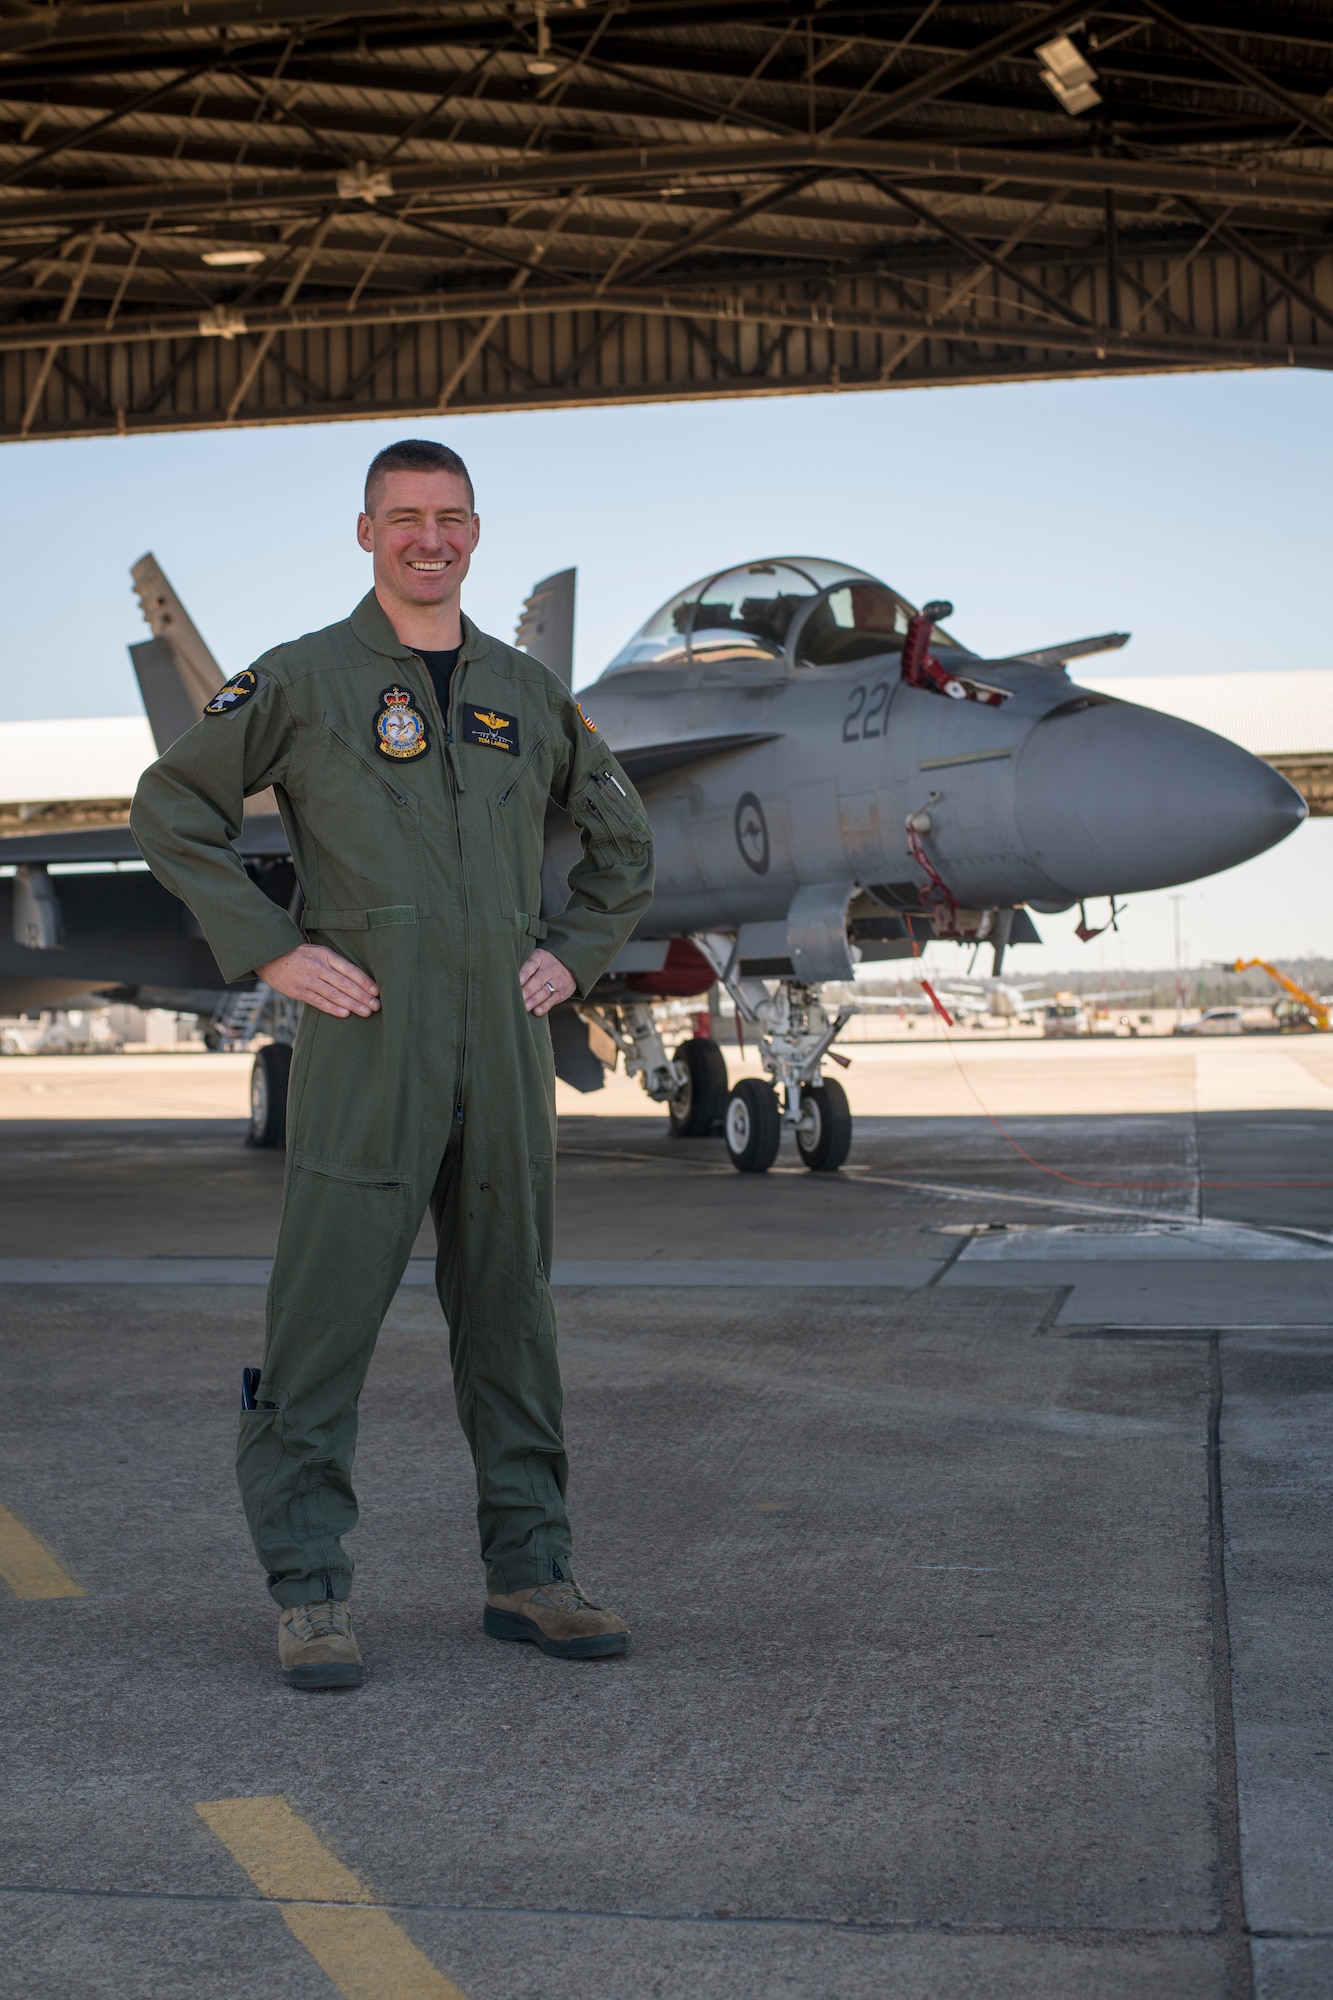 U.S. Air Force Maj. Thomas Larner, Royal Australian Air Force No. 1 Squadron F/A-18F Super Hornet weapon systems officer, is serving as an exchange officer at RAAF Base Amberley, Australia, as part of the U.S. Air Force military personnel exchange program. The exchange program is a special duty assignment that allows Airmen to integrate into military units of foreign allies with the intent of building, sustaining and expanding international relationships. (U.S. Navy photo by Mass Communication Specialist 2nd Class Jeanette Mullinax)